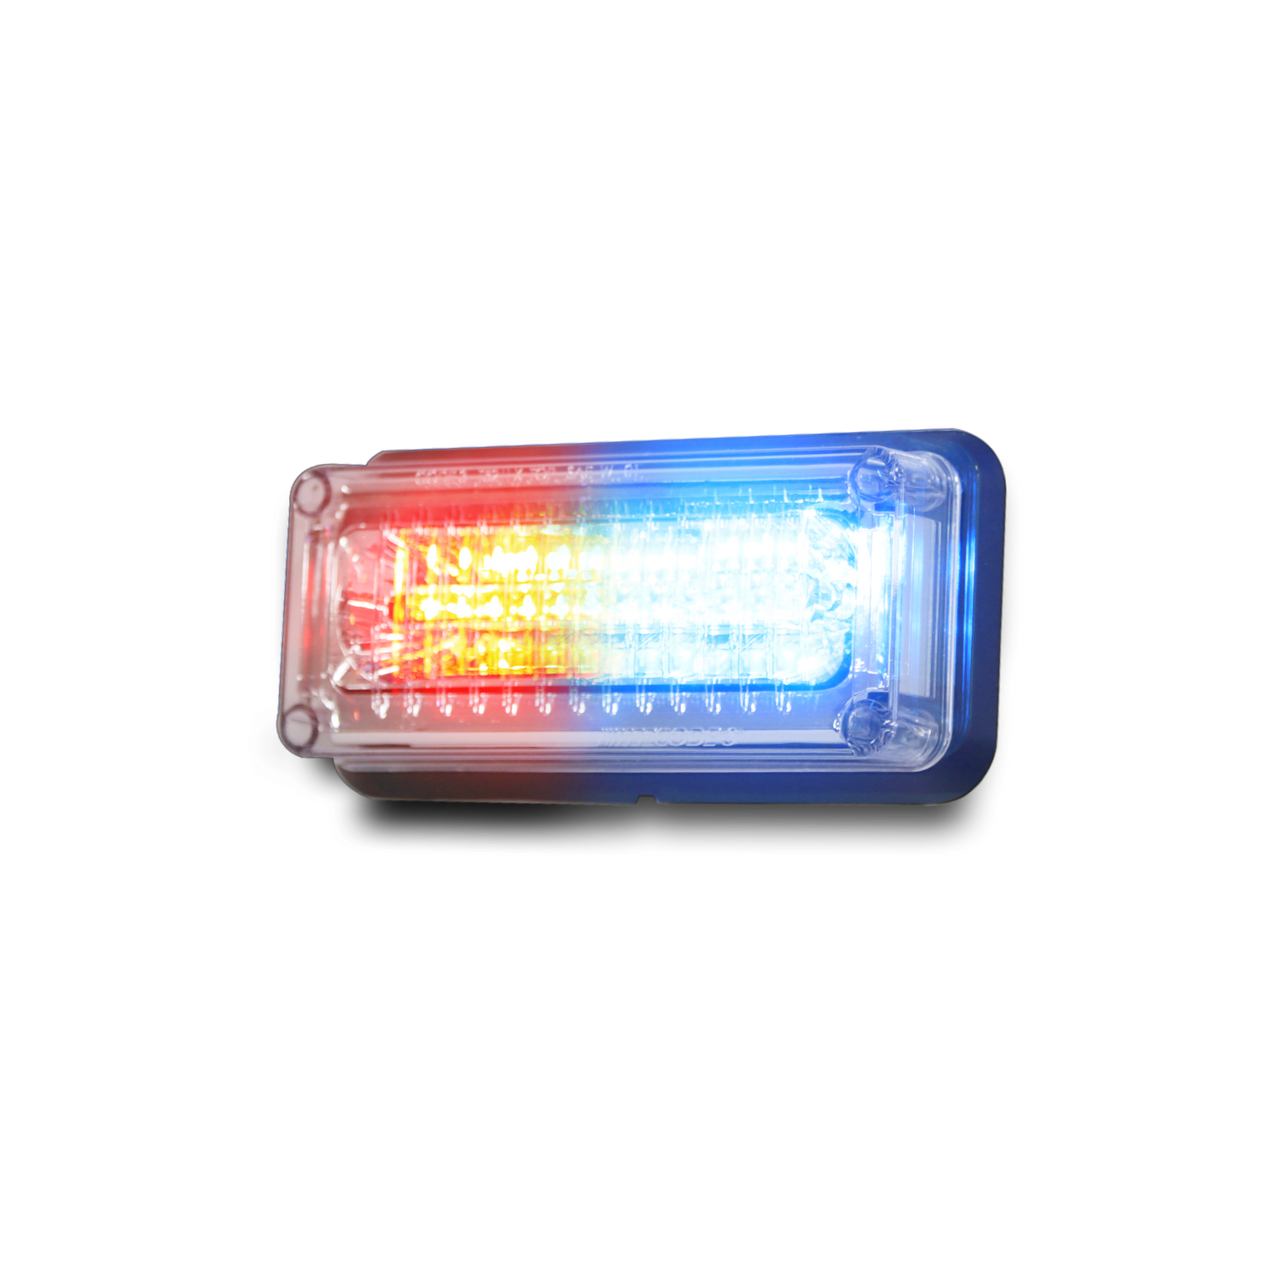 Code-3 - PRIZM II Perimeter Lights - 3x7 Inch, Available in Dual Color, 22 LED per lighthead, Optional Chrome Bezel